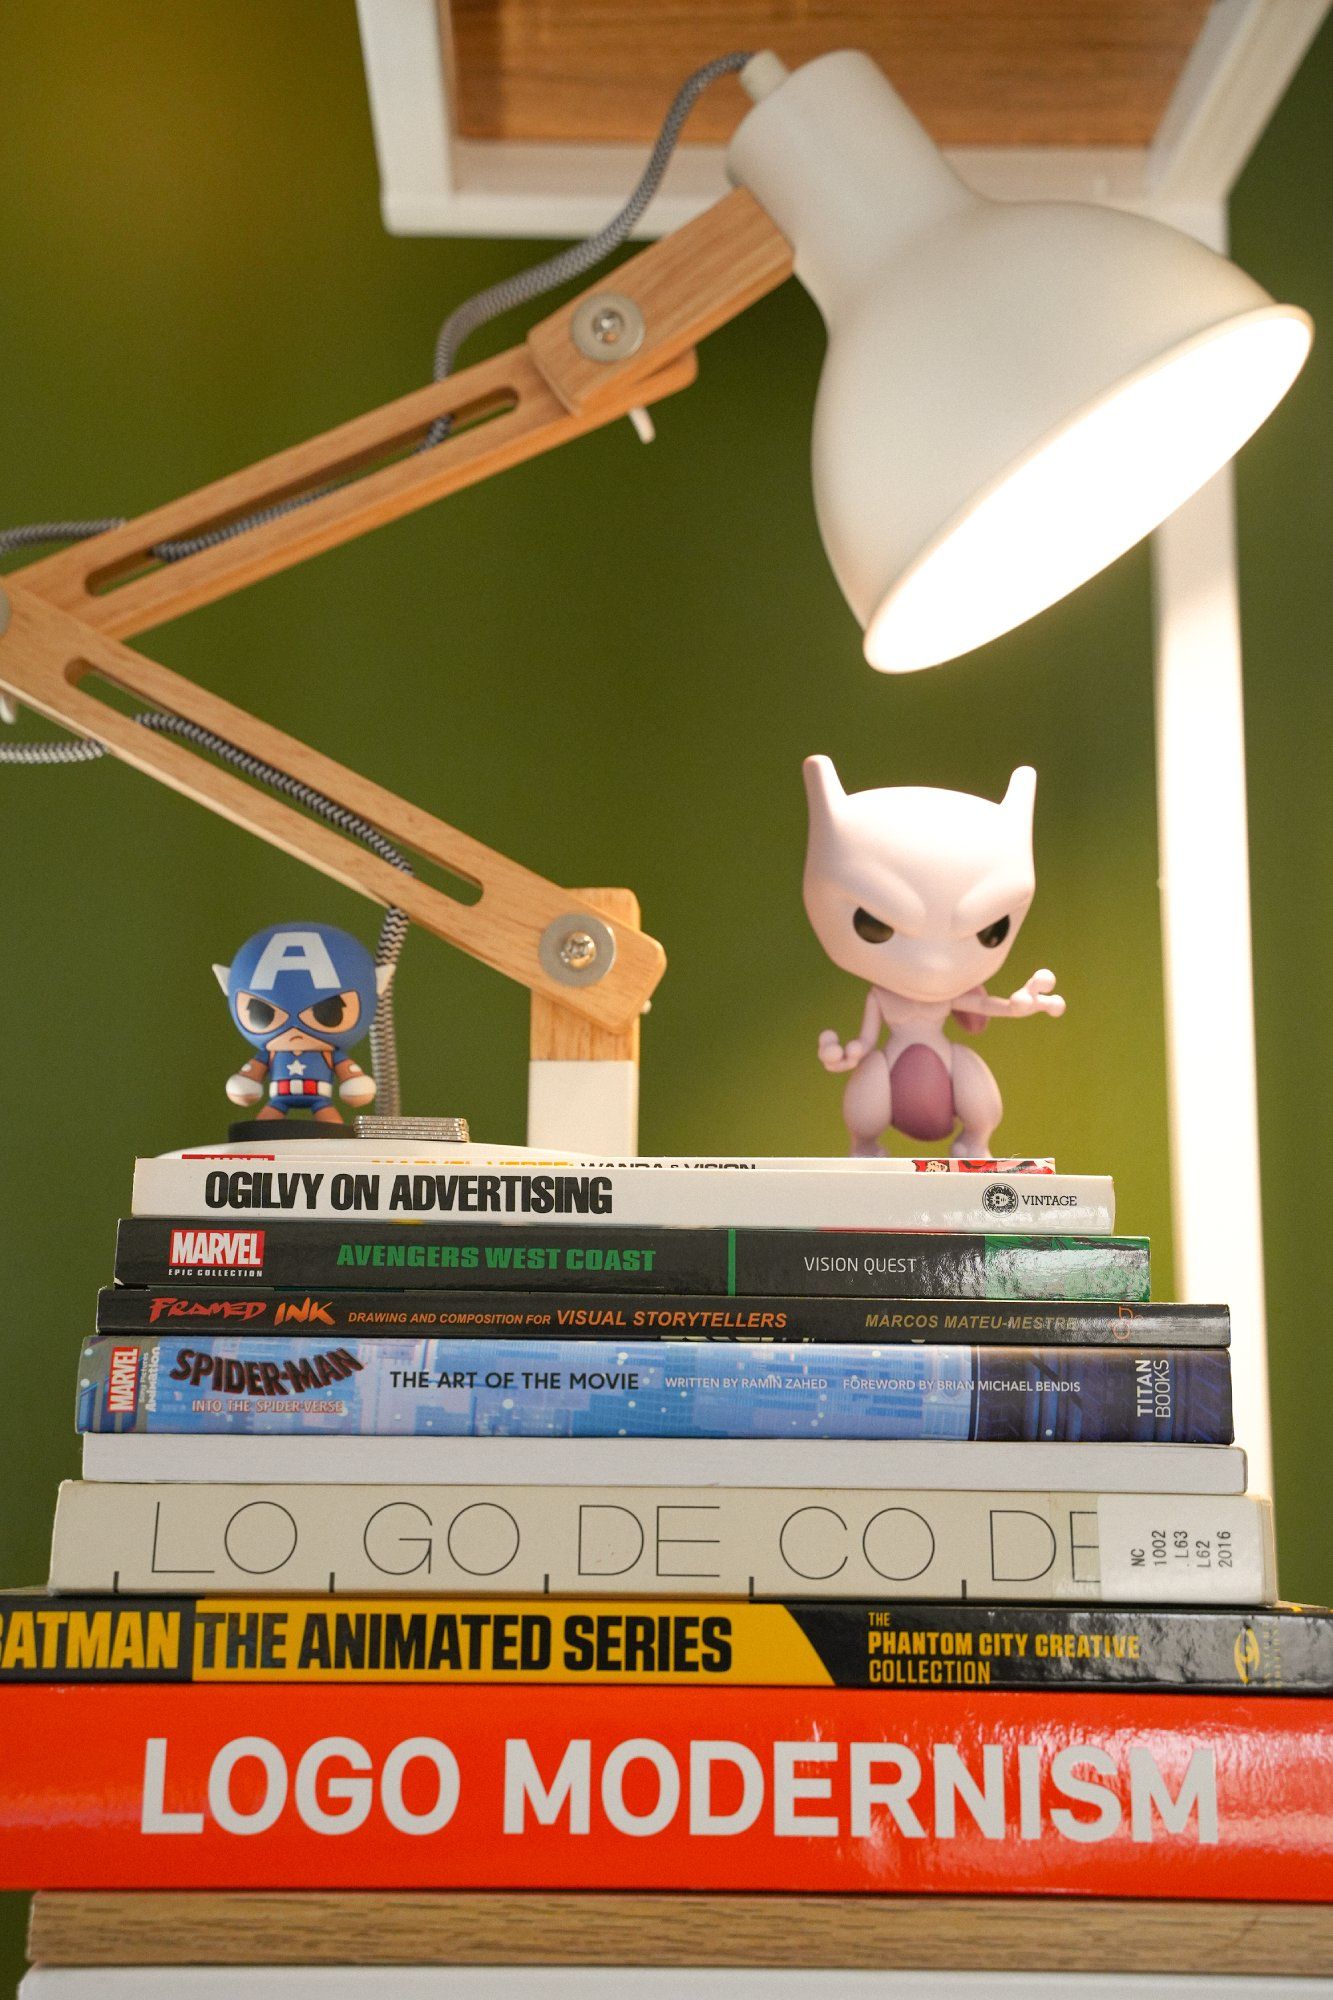 A stack of books on design, illustration and advertising, with two figurines and a lamp placed on top